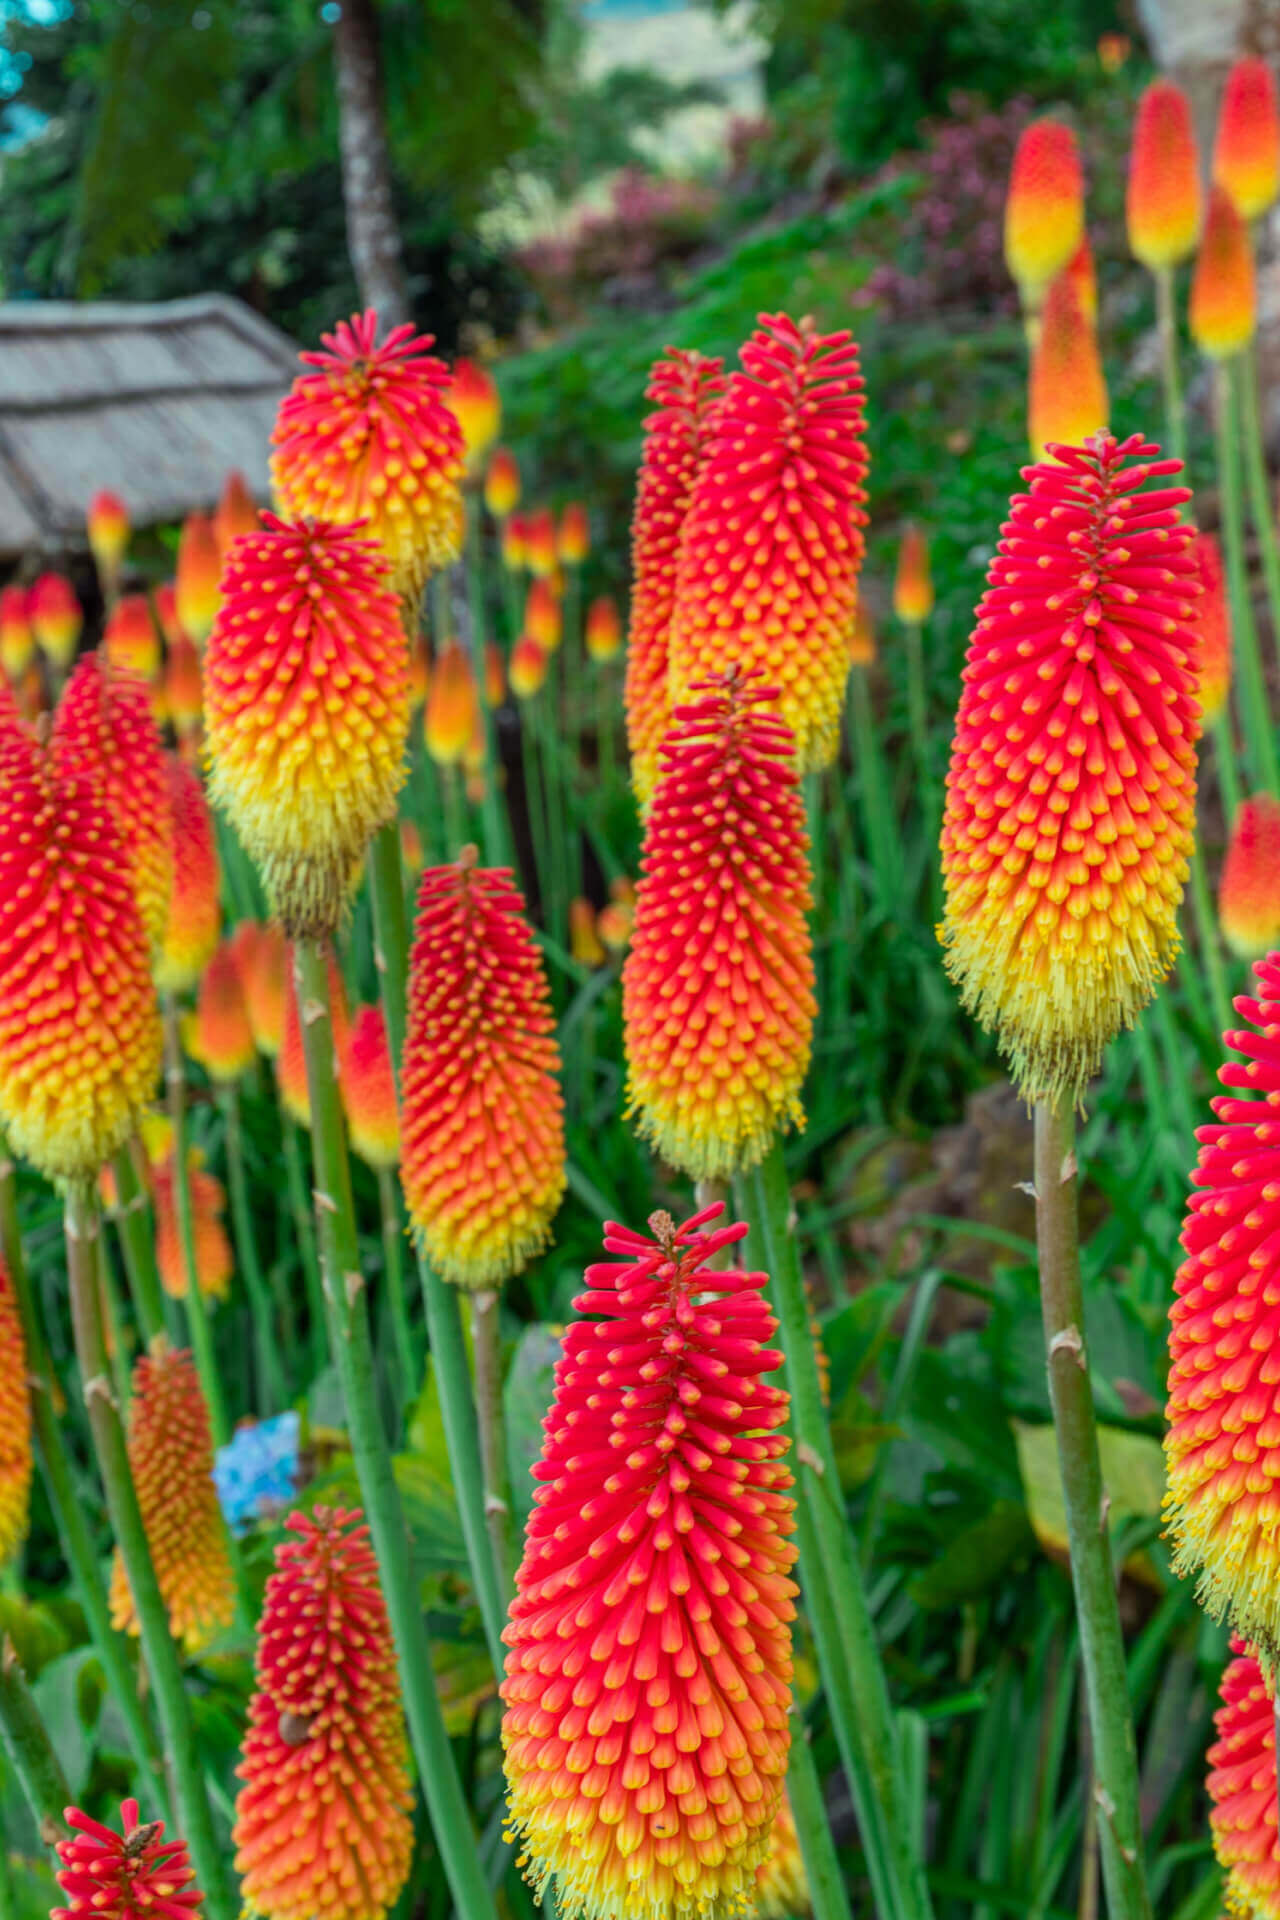 Red Hot Poker Plant